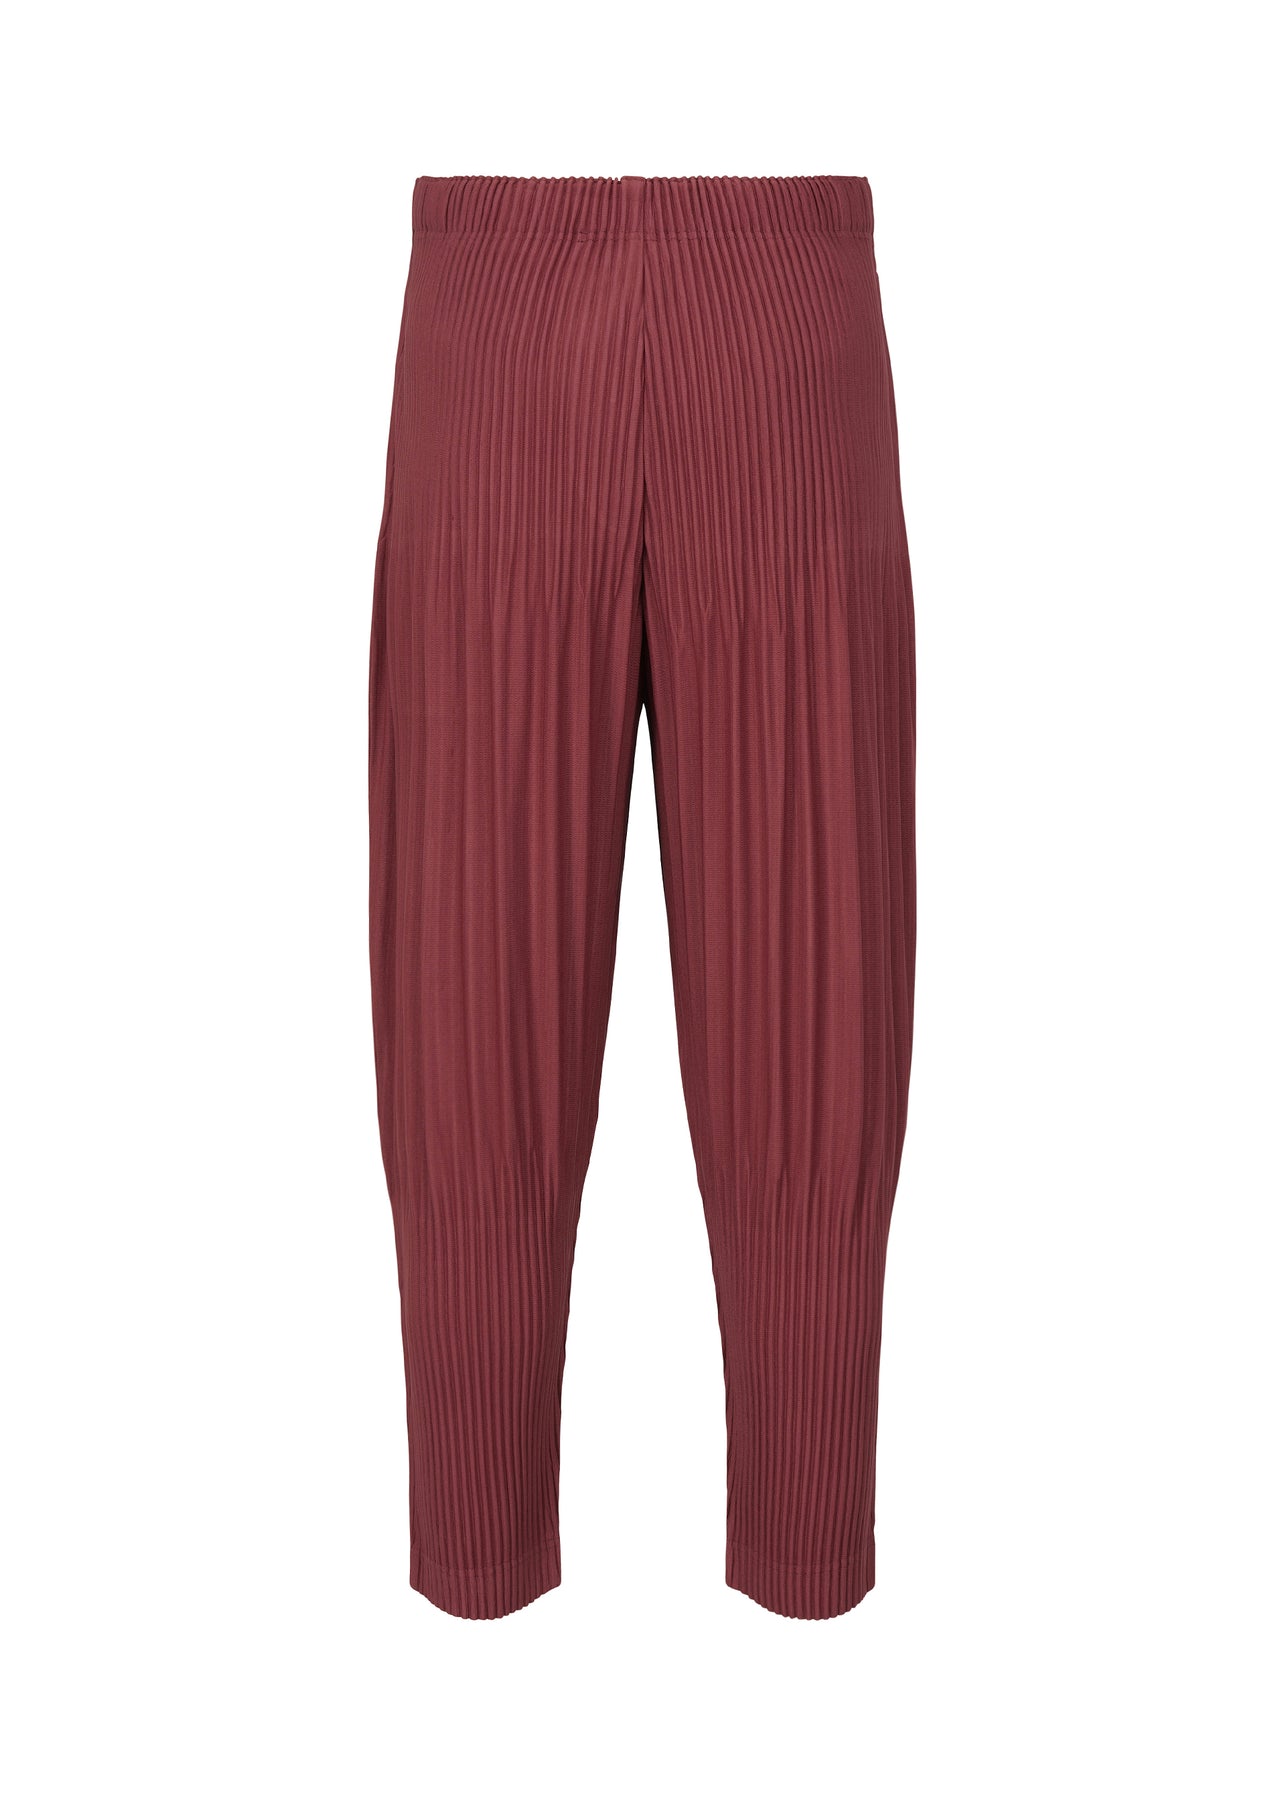 ISSEY USA | ISSEY MIYAKE PANTS PLEATS ONLINE MIYAKE STORE The COLOR | official